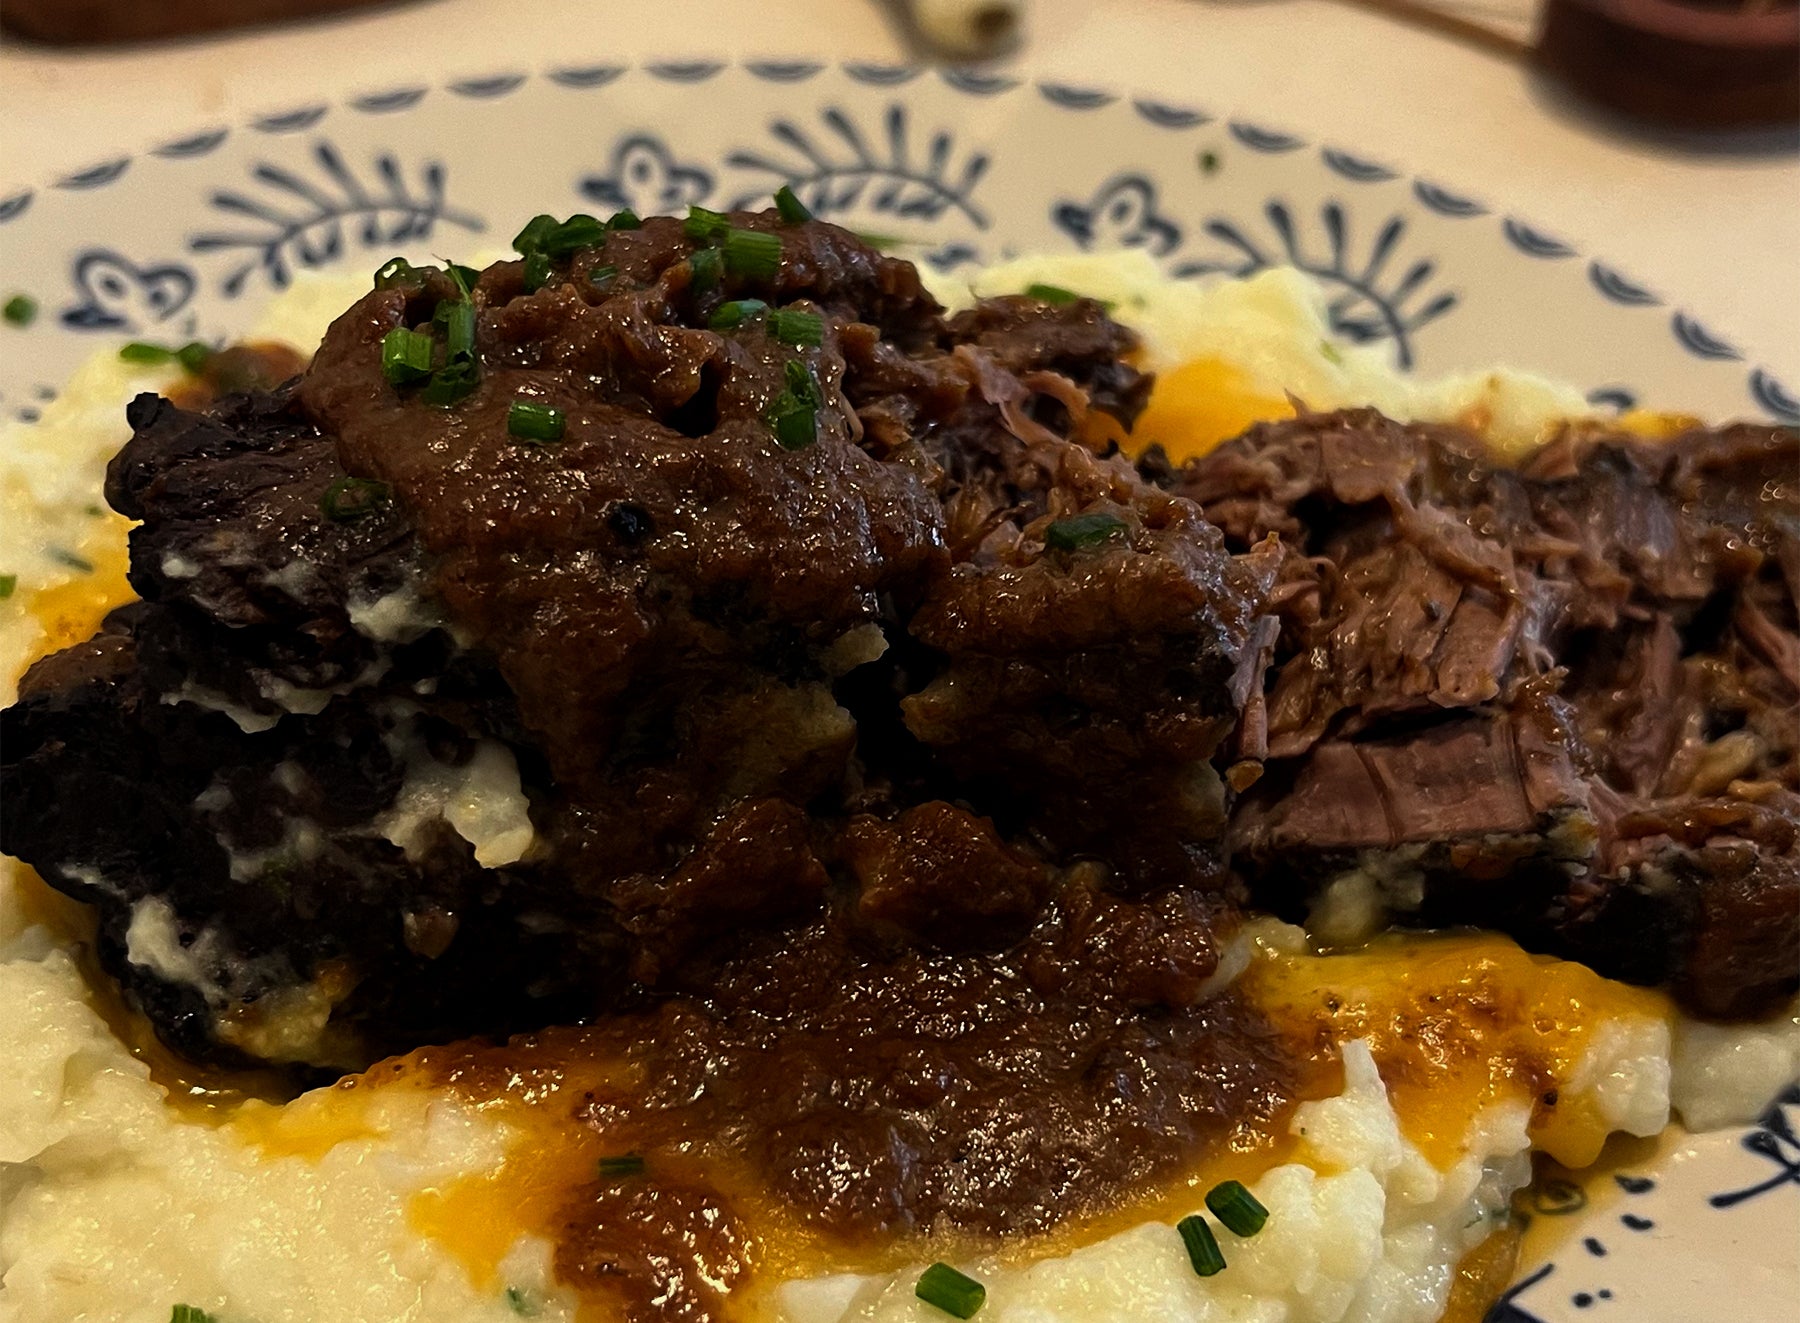 Red Wine Braised Ibérico Pork Coller "Coppa" with Mashed Potatoes